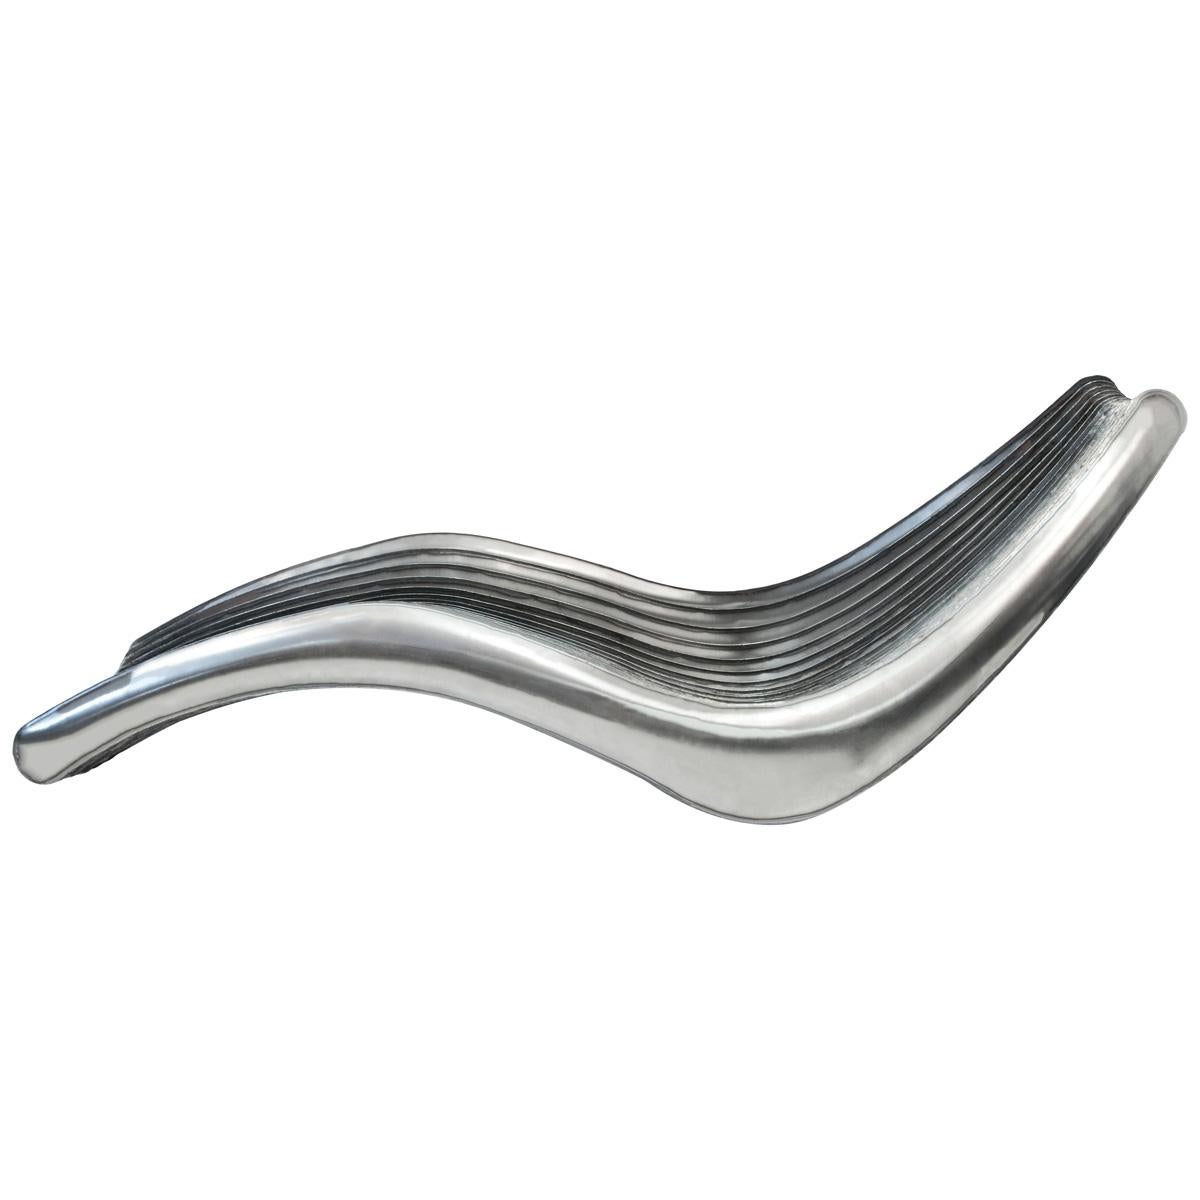 Steel in Rotation No. 2 Chaise Long I Polished Stainless Steel Seating by Zieta